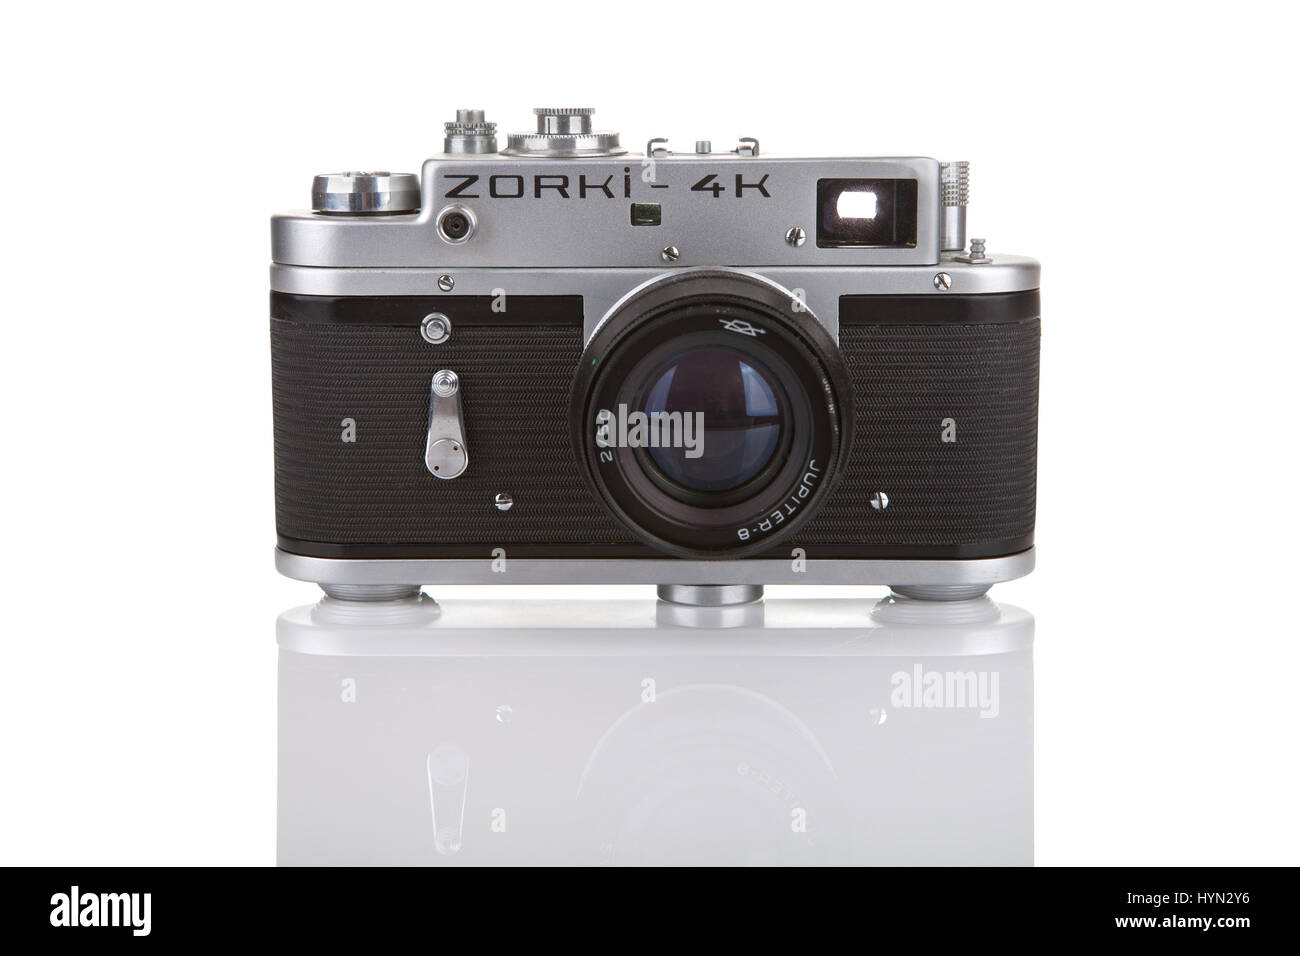 ZAGREB, CROATIA - FEBRUARY 04, 2014: Zorki 4 was possibly the most popular of all Zorki cameras, introduced in 1956 by KMZ factory in Krasnogorsk, Rus Stock Photo